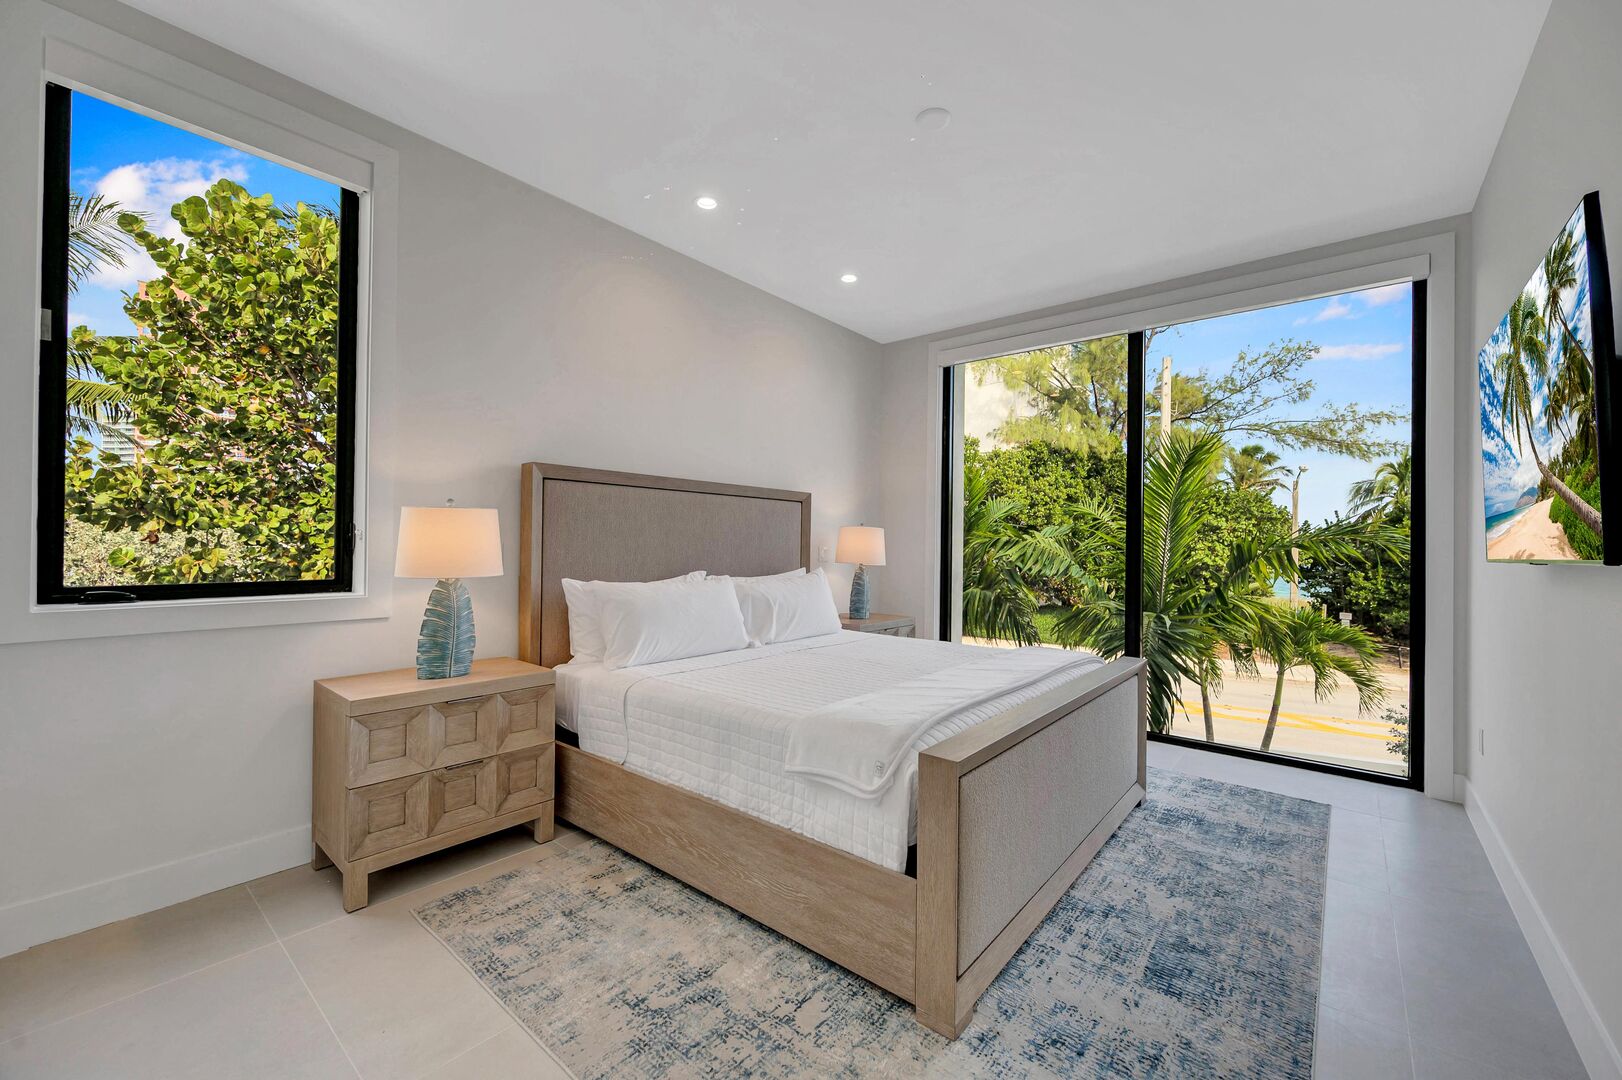 Bedroom Three is located on the second floor, features a king size bed an ensuite bathroom and Ocean views.